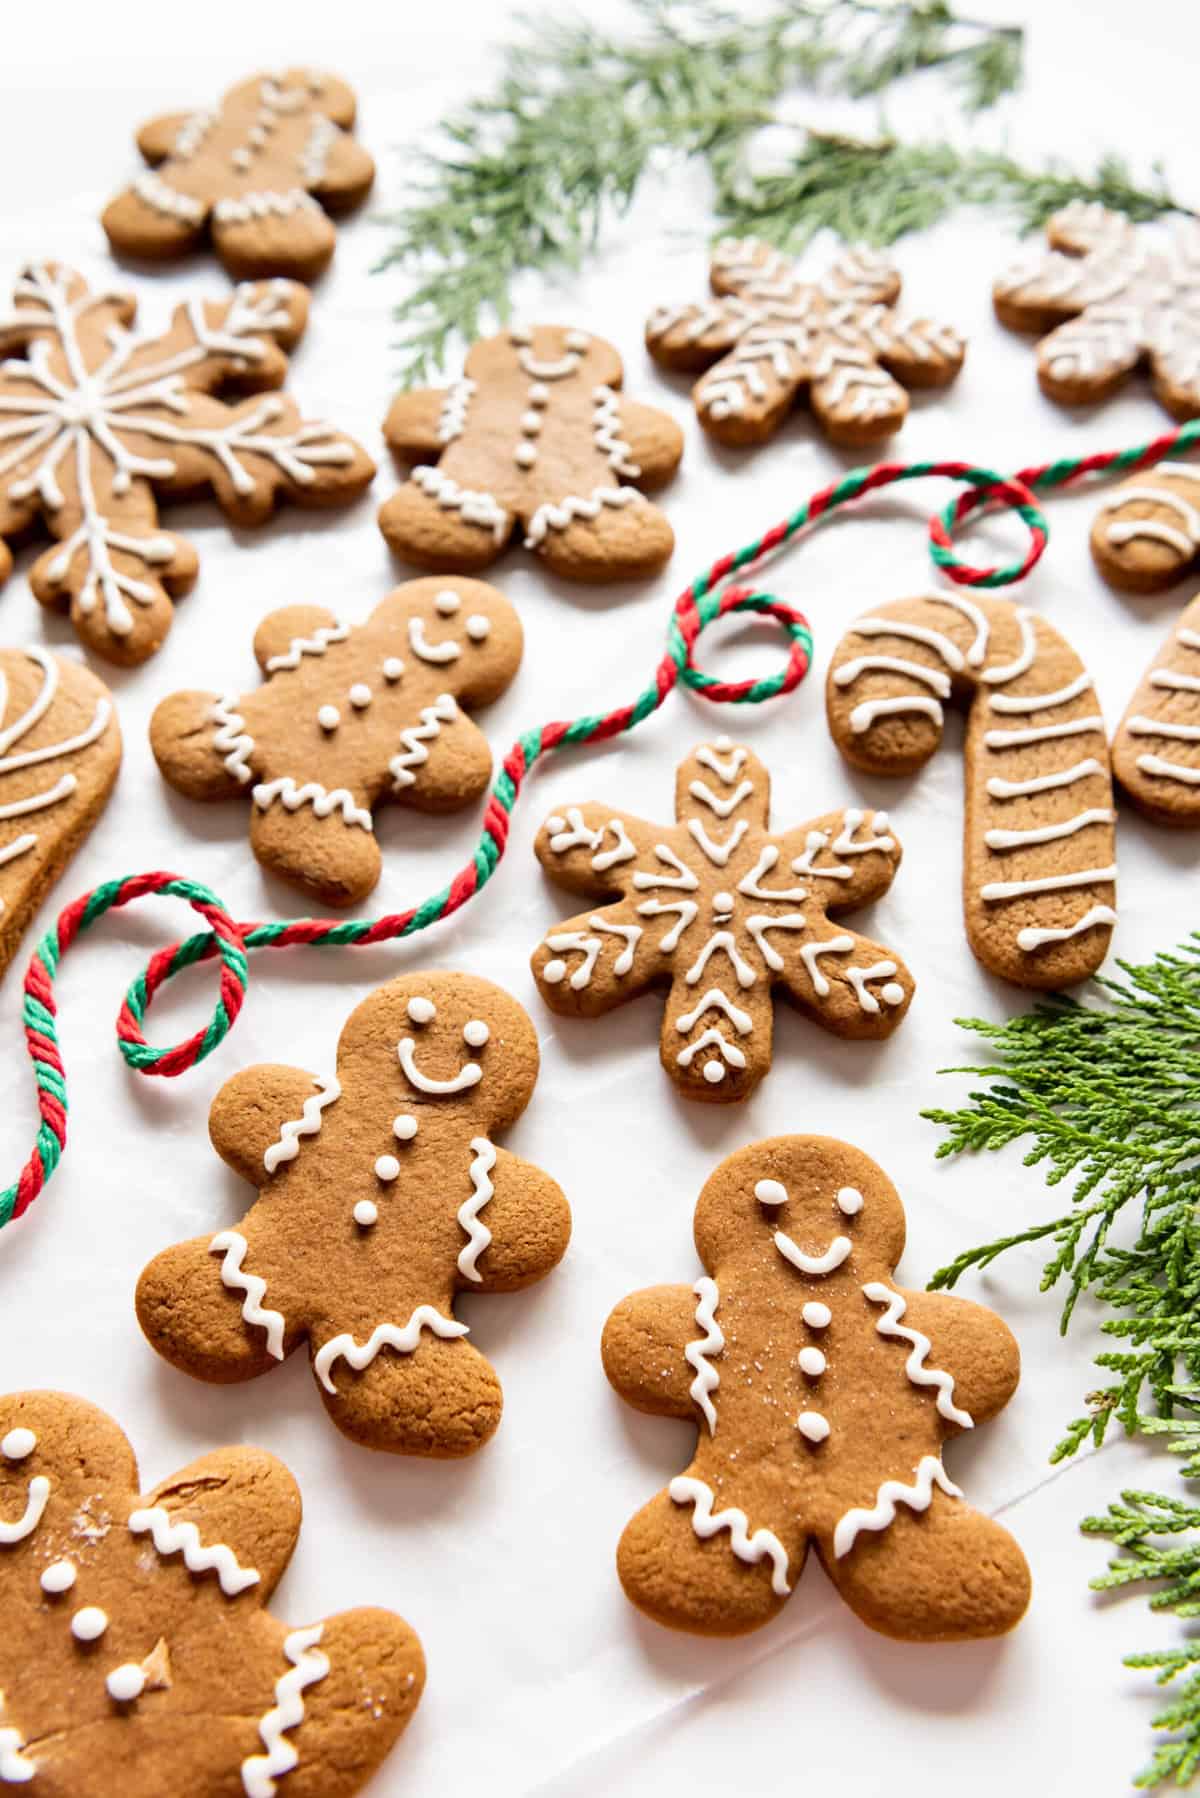 Gingerbread cookie shapes decorated in white icing with twirling loops of yarn and green sprigs around them.